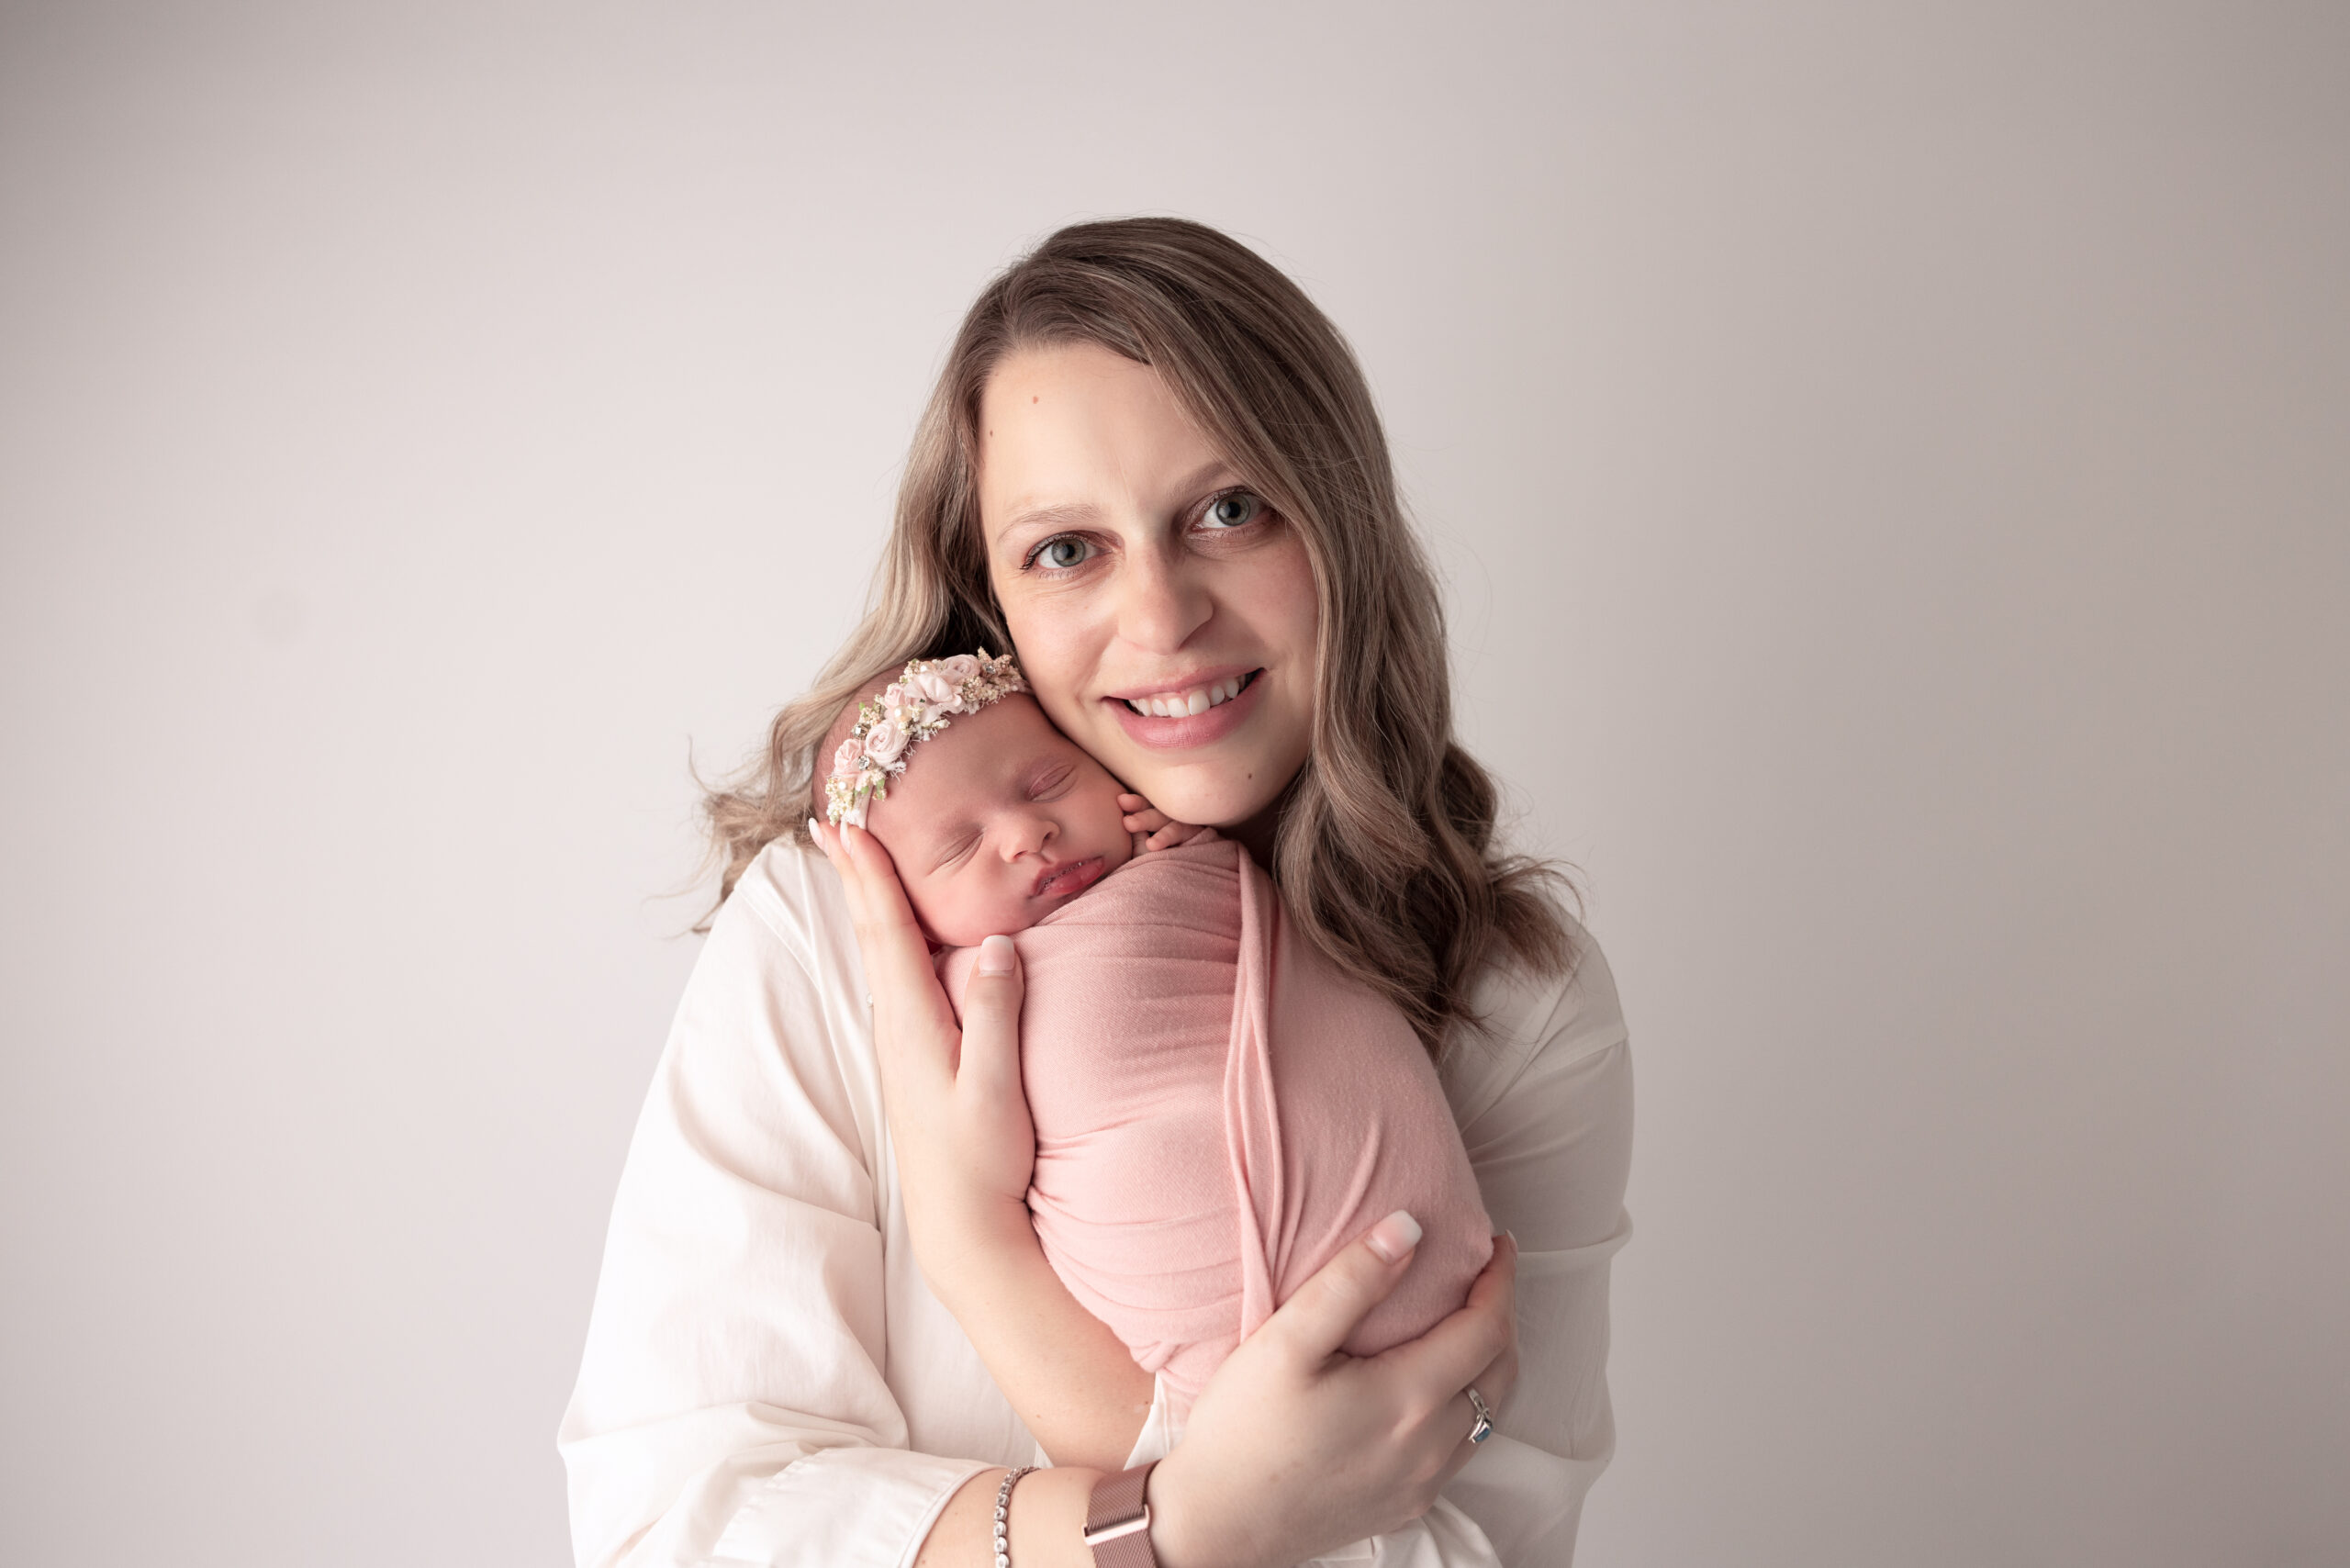 Portrait of Mother holding her baby close to her face while baby is wrapped in pink